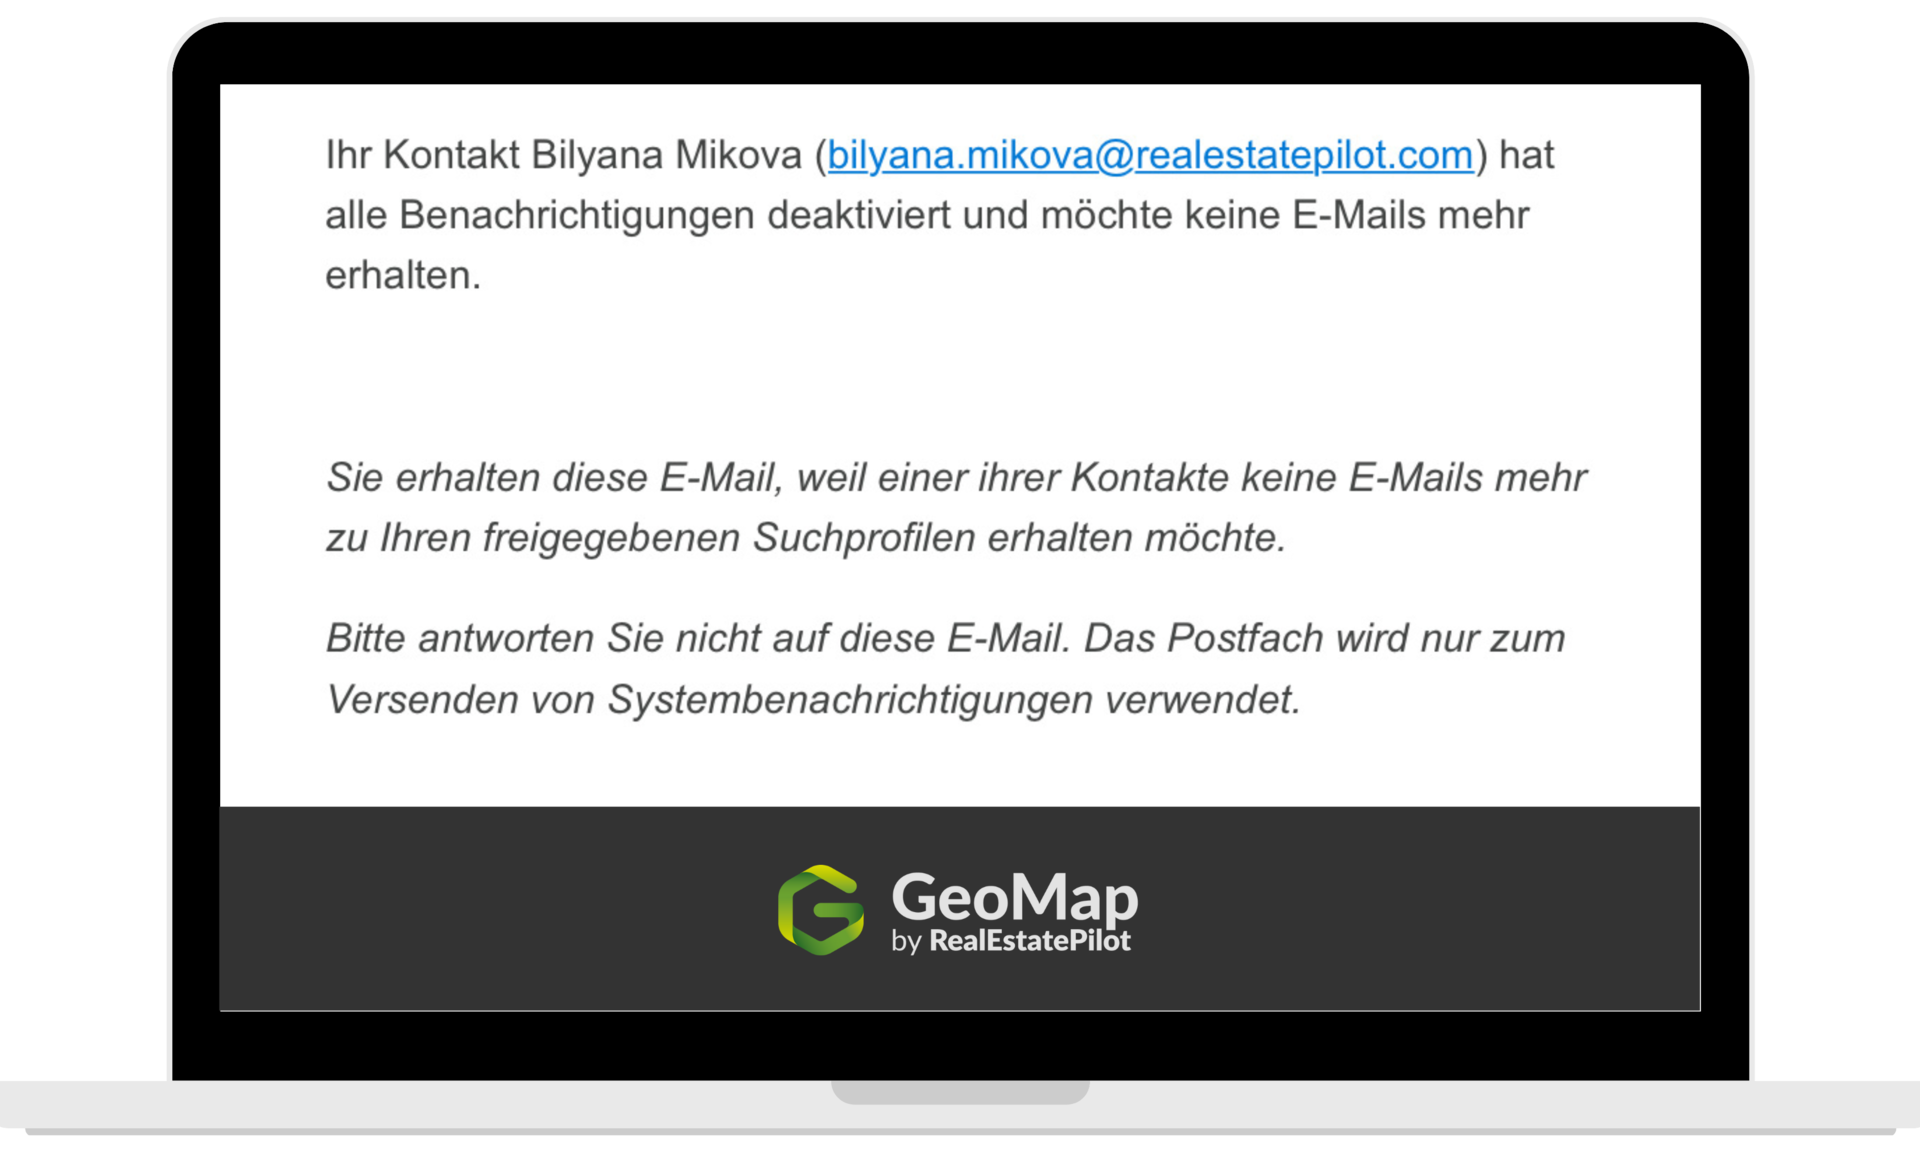 opt-out-info-geomap